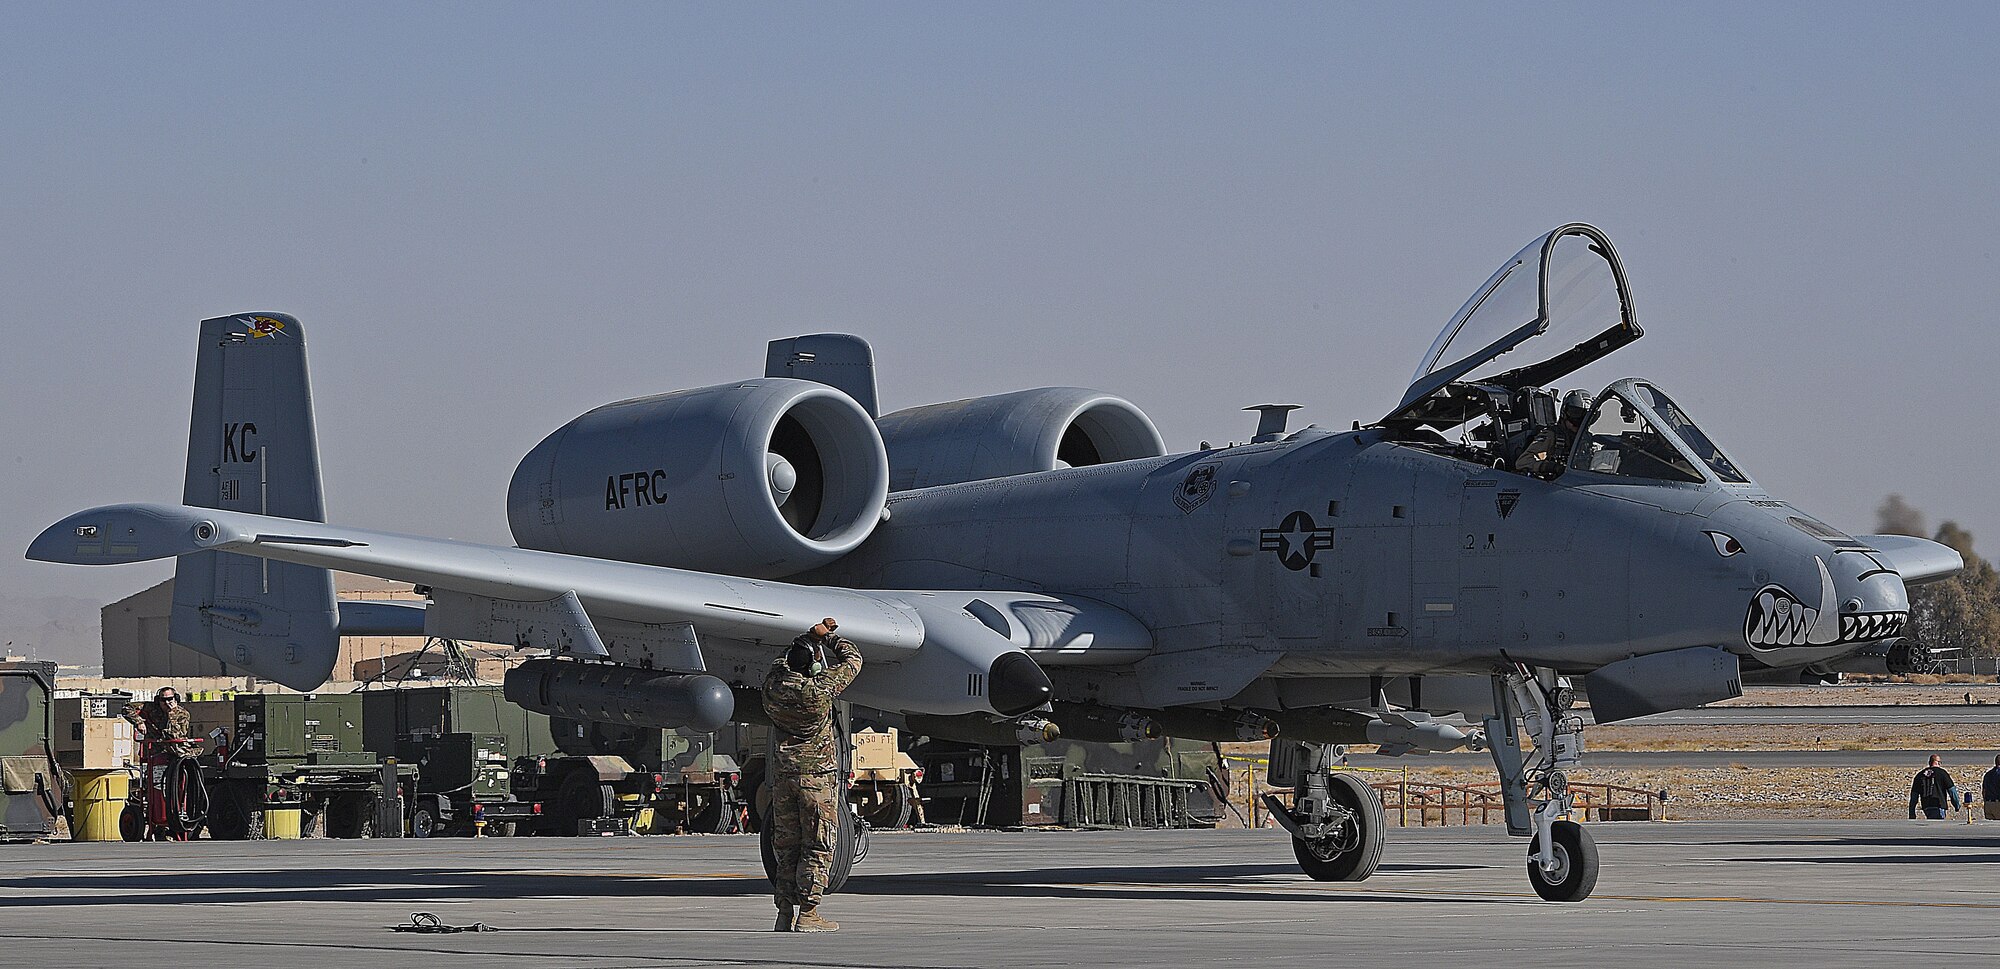 An A-10 Thunderbolt II crew chief, assigned to Whiteman Air Force Base, prepares to launch an aircraft on Kandahar Airfield, Afghanistan, Jan. 20, 2018.